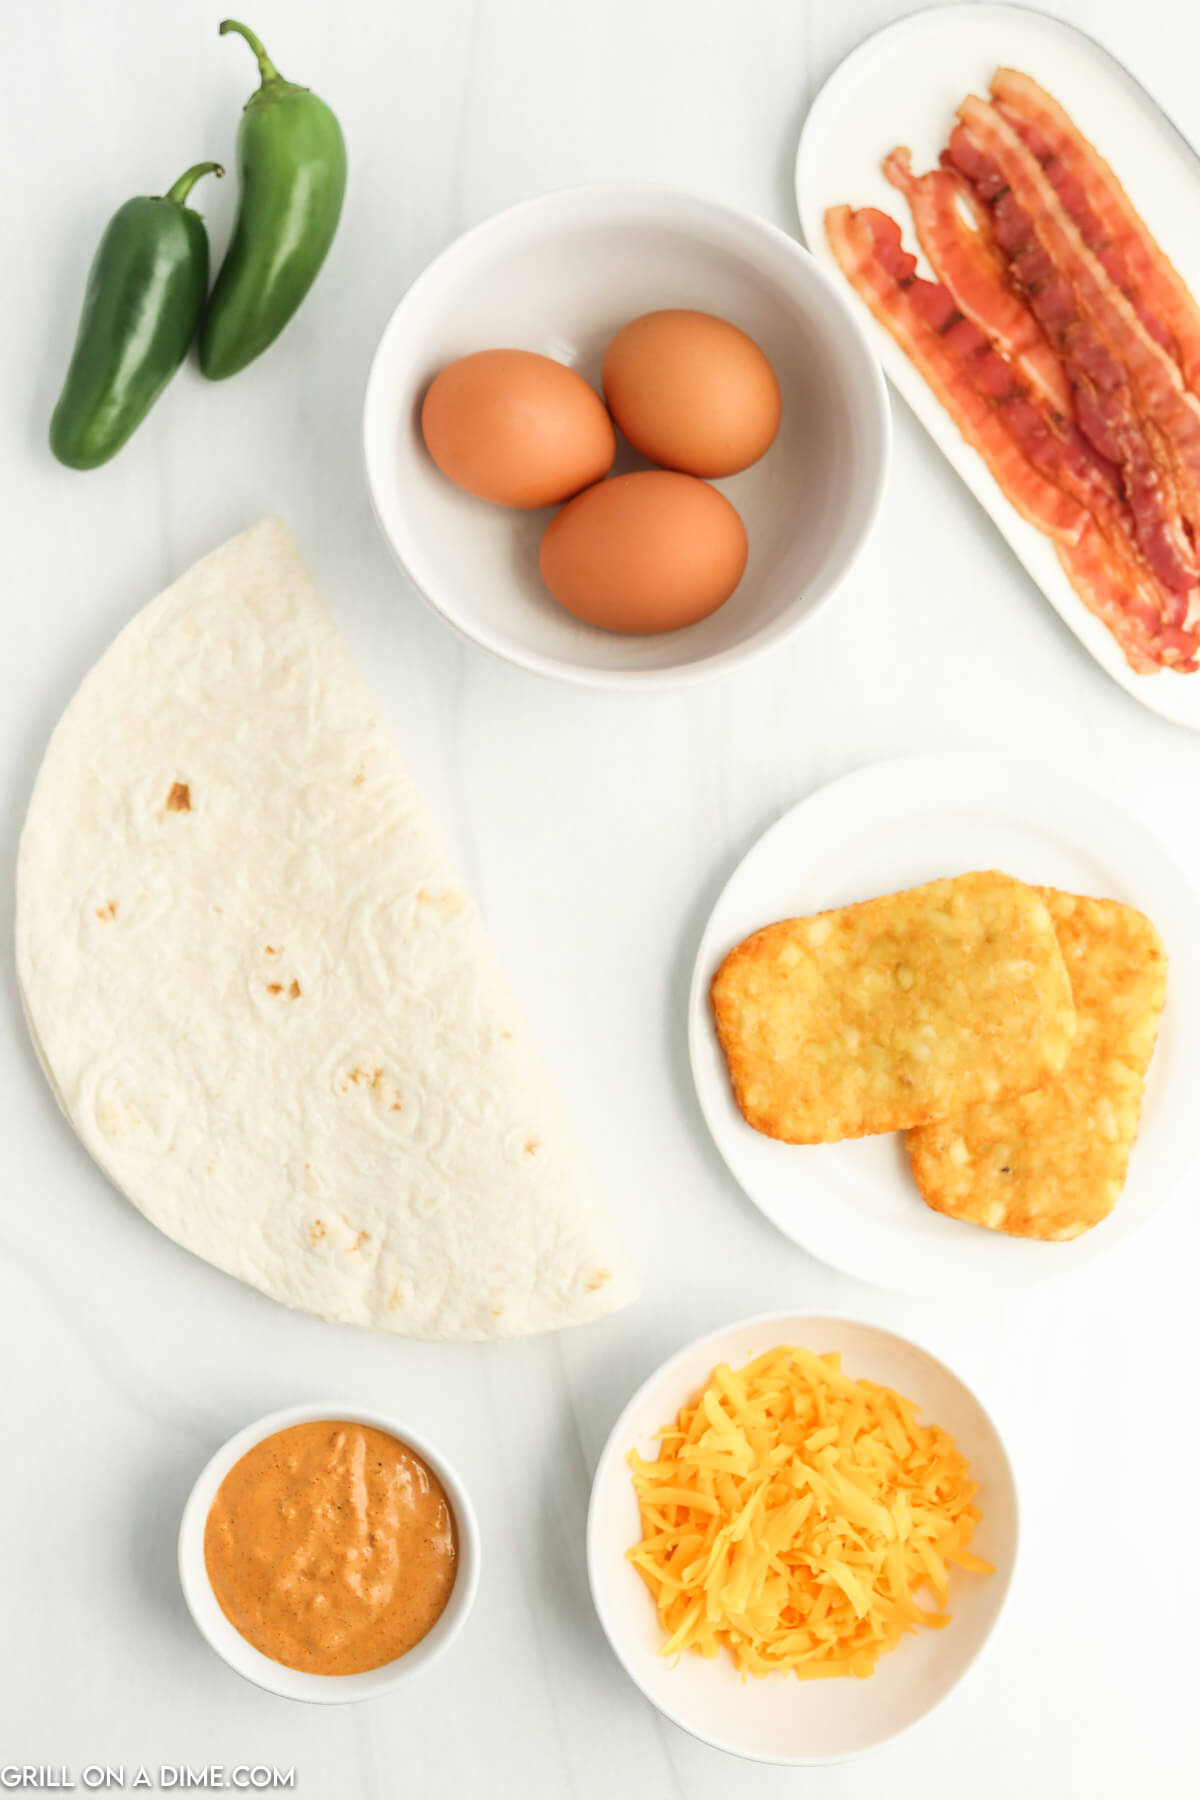 Ingredients needed - eggs, cheese, bacon, frozen hash browns, tortillas, jalapeno sauce, oil